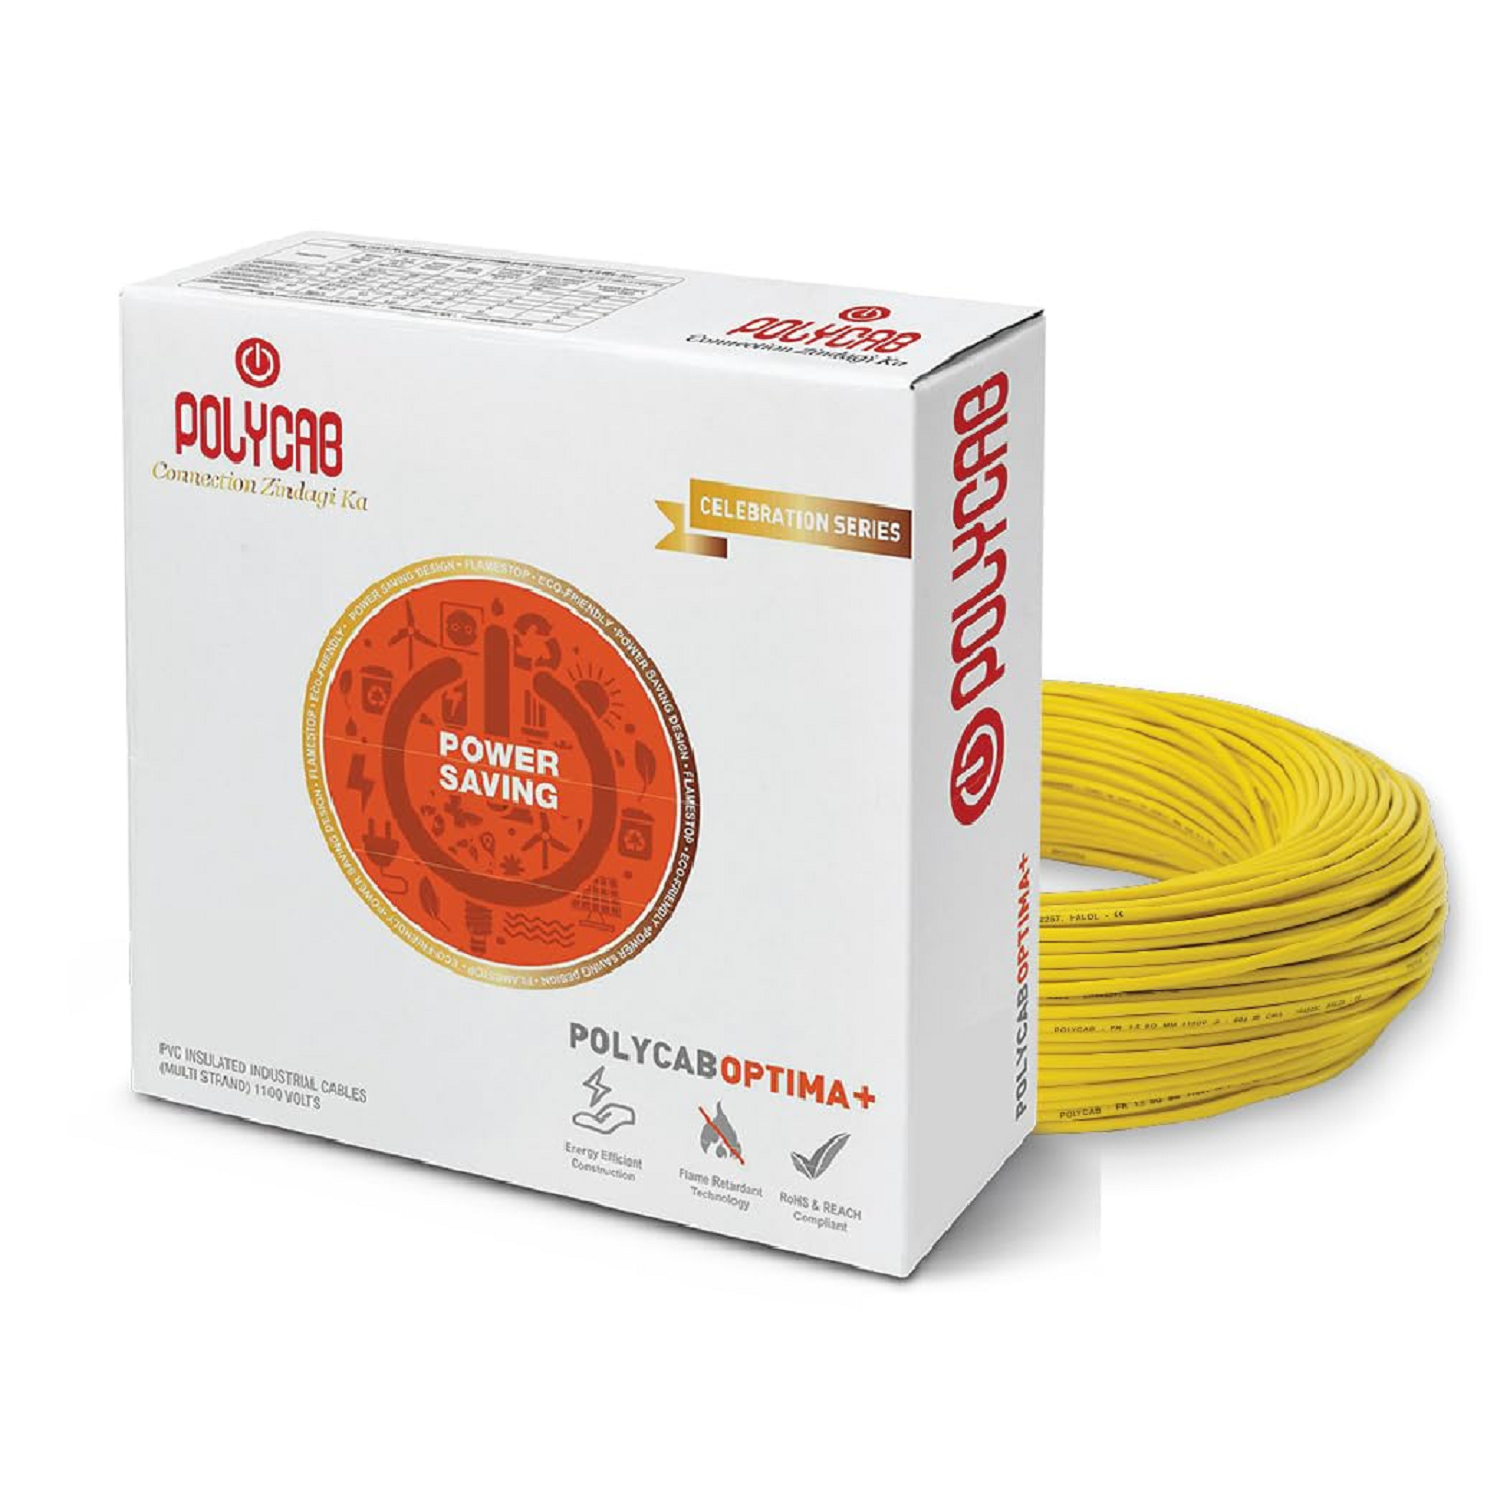 Polycab Optima Plus FR-LF 1 SQ-MM, 90 Meters PVC Insulated Copper Wire Single Core (Yellow)